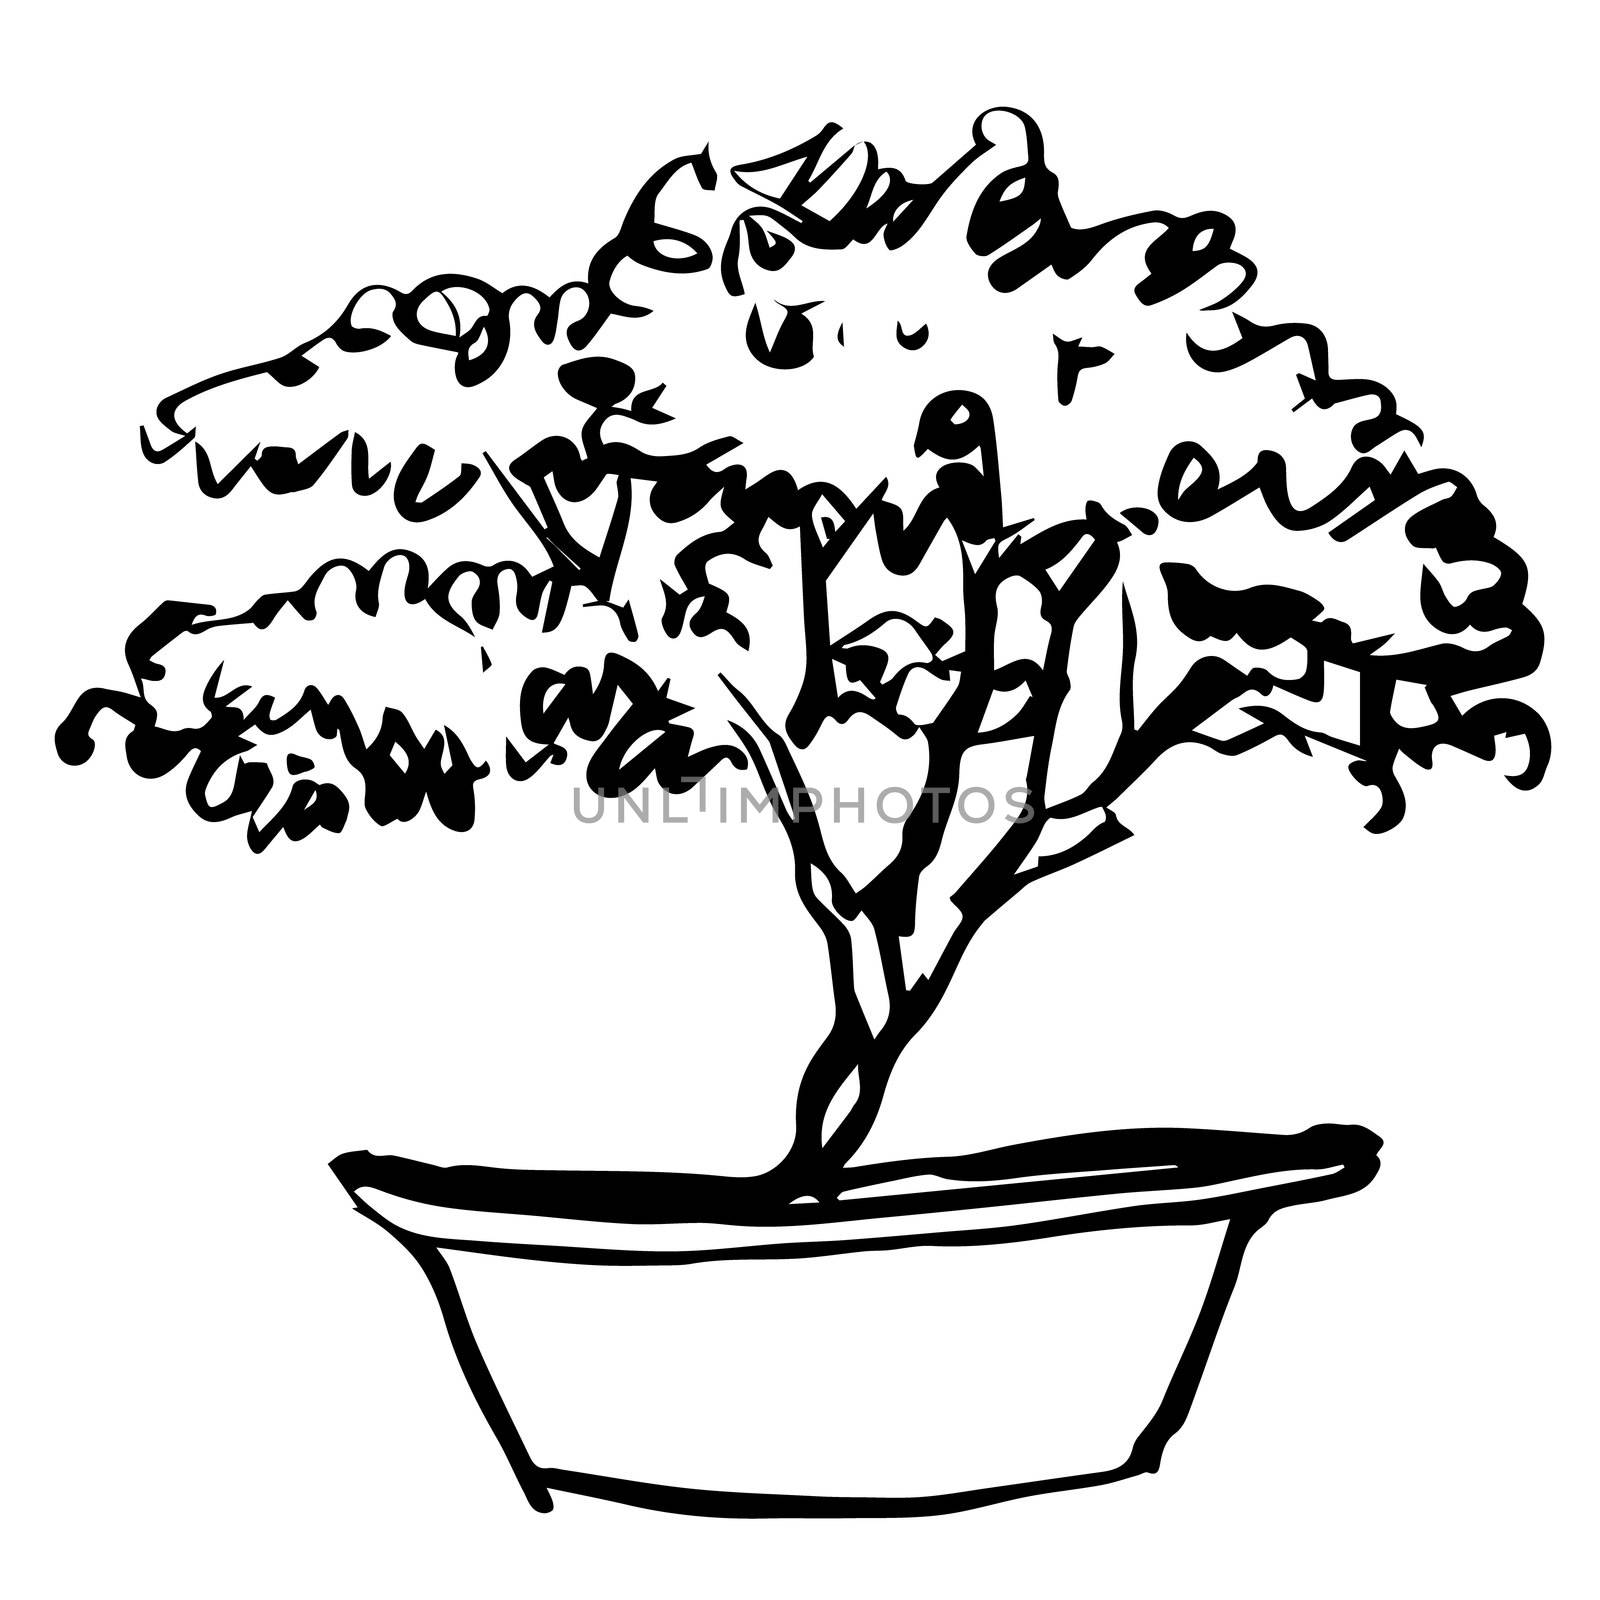 freehand sketch illustration of tree in pot doodle hand drawn